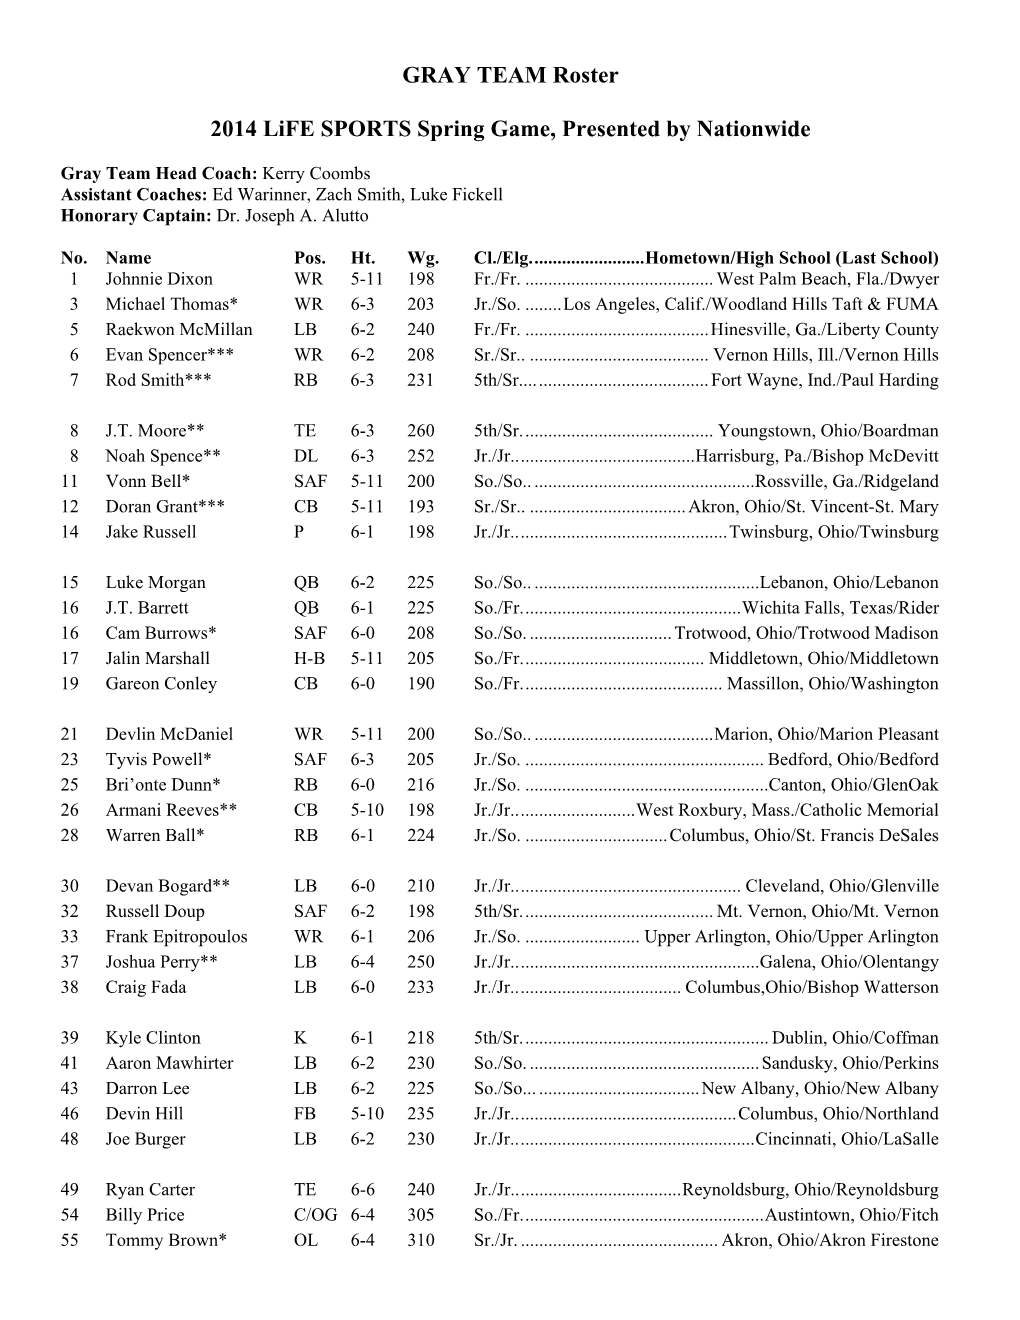 GRAY TEAM Roster 2014 Life SPORTS Spring Game, Presented by Nationwide